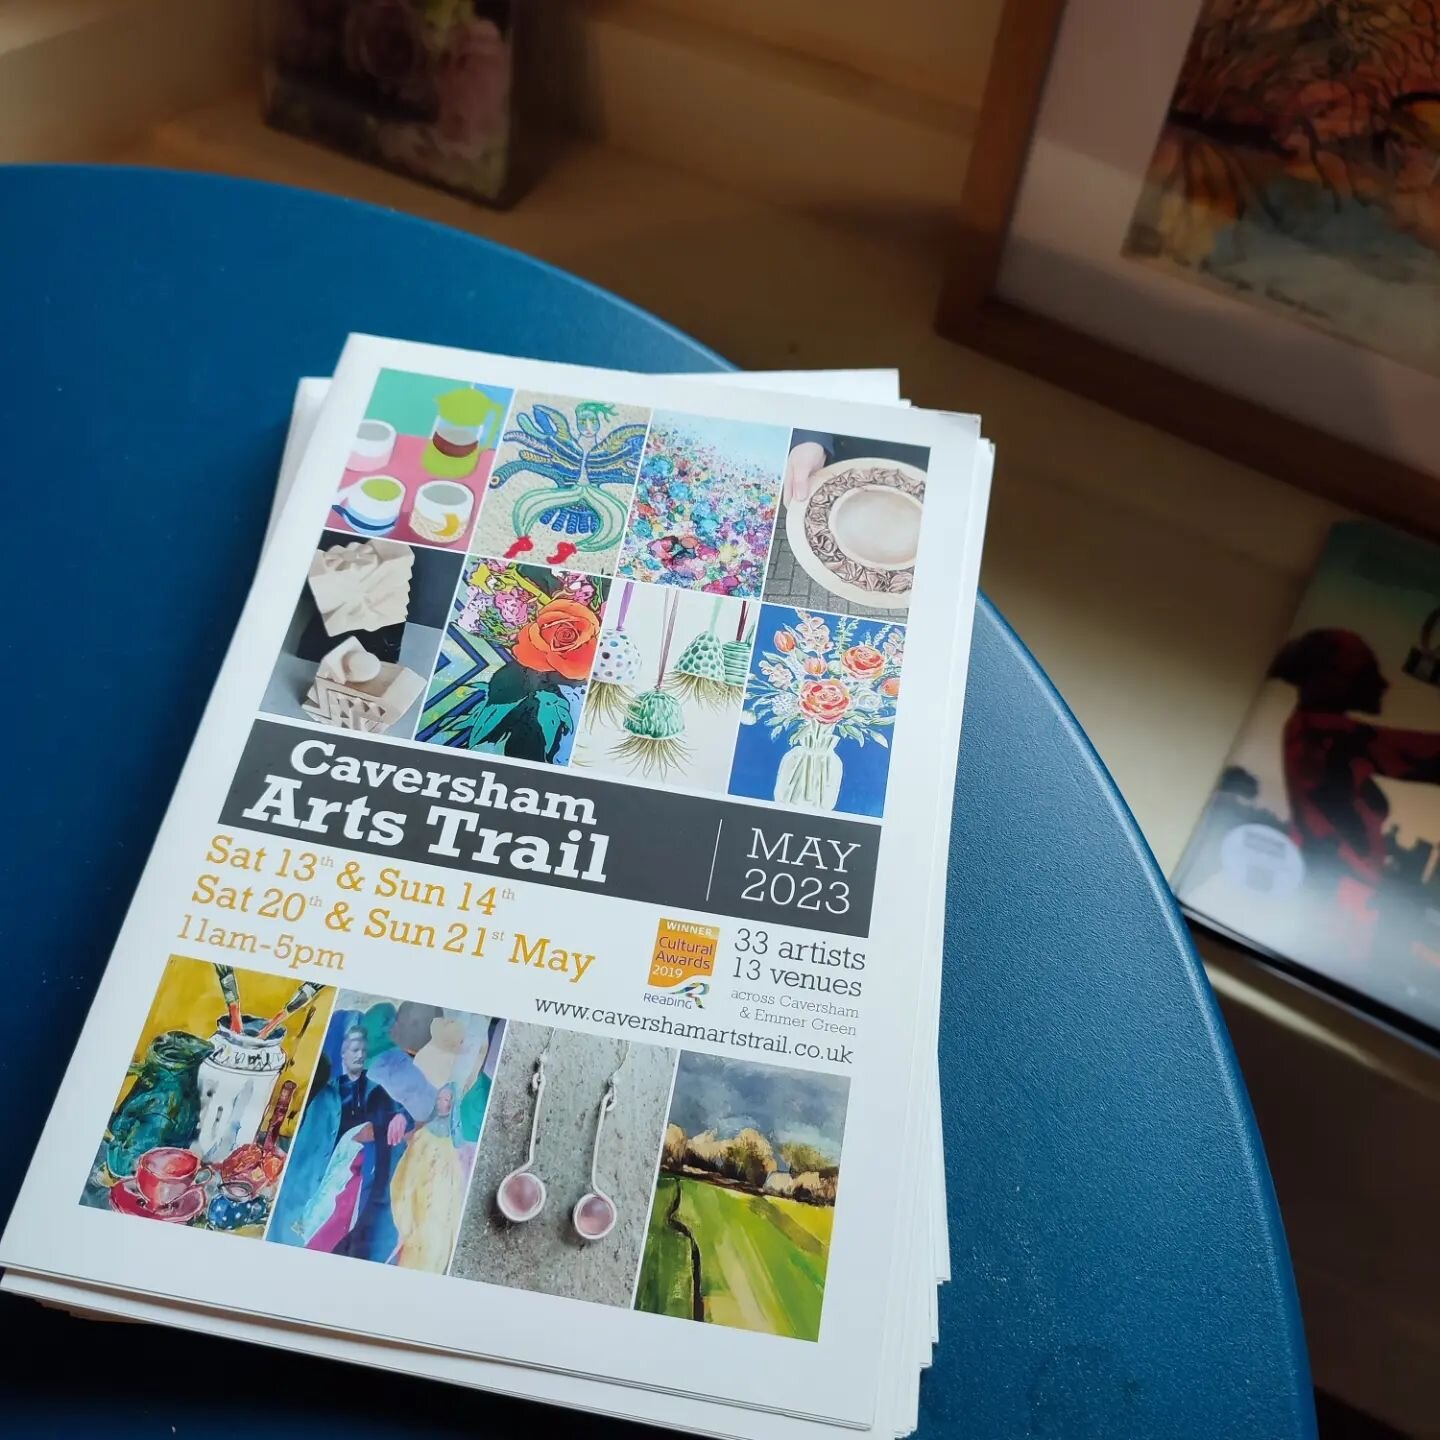 Caversham Arts Trail is starting in just under 2 weeks!!

This brochures with a map of the trail can be found in some local shops, cafes...etc. I just dropped these ones off at The Village Hamper cafe in Sonning. Check out the trails website for map 